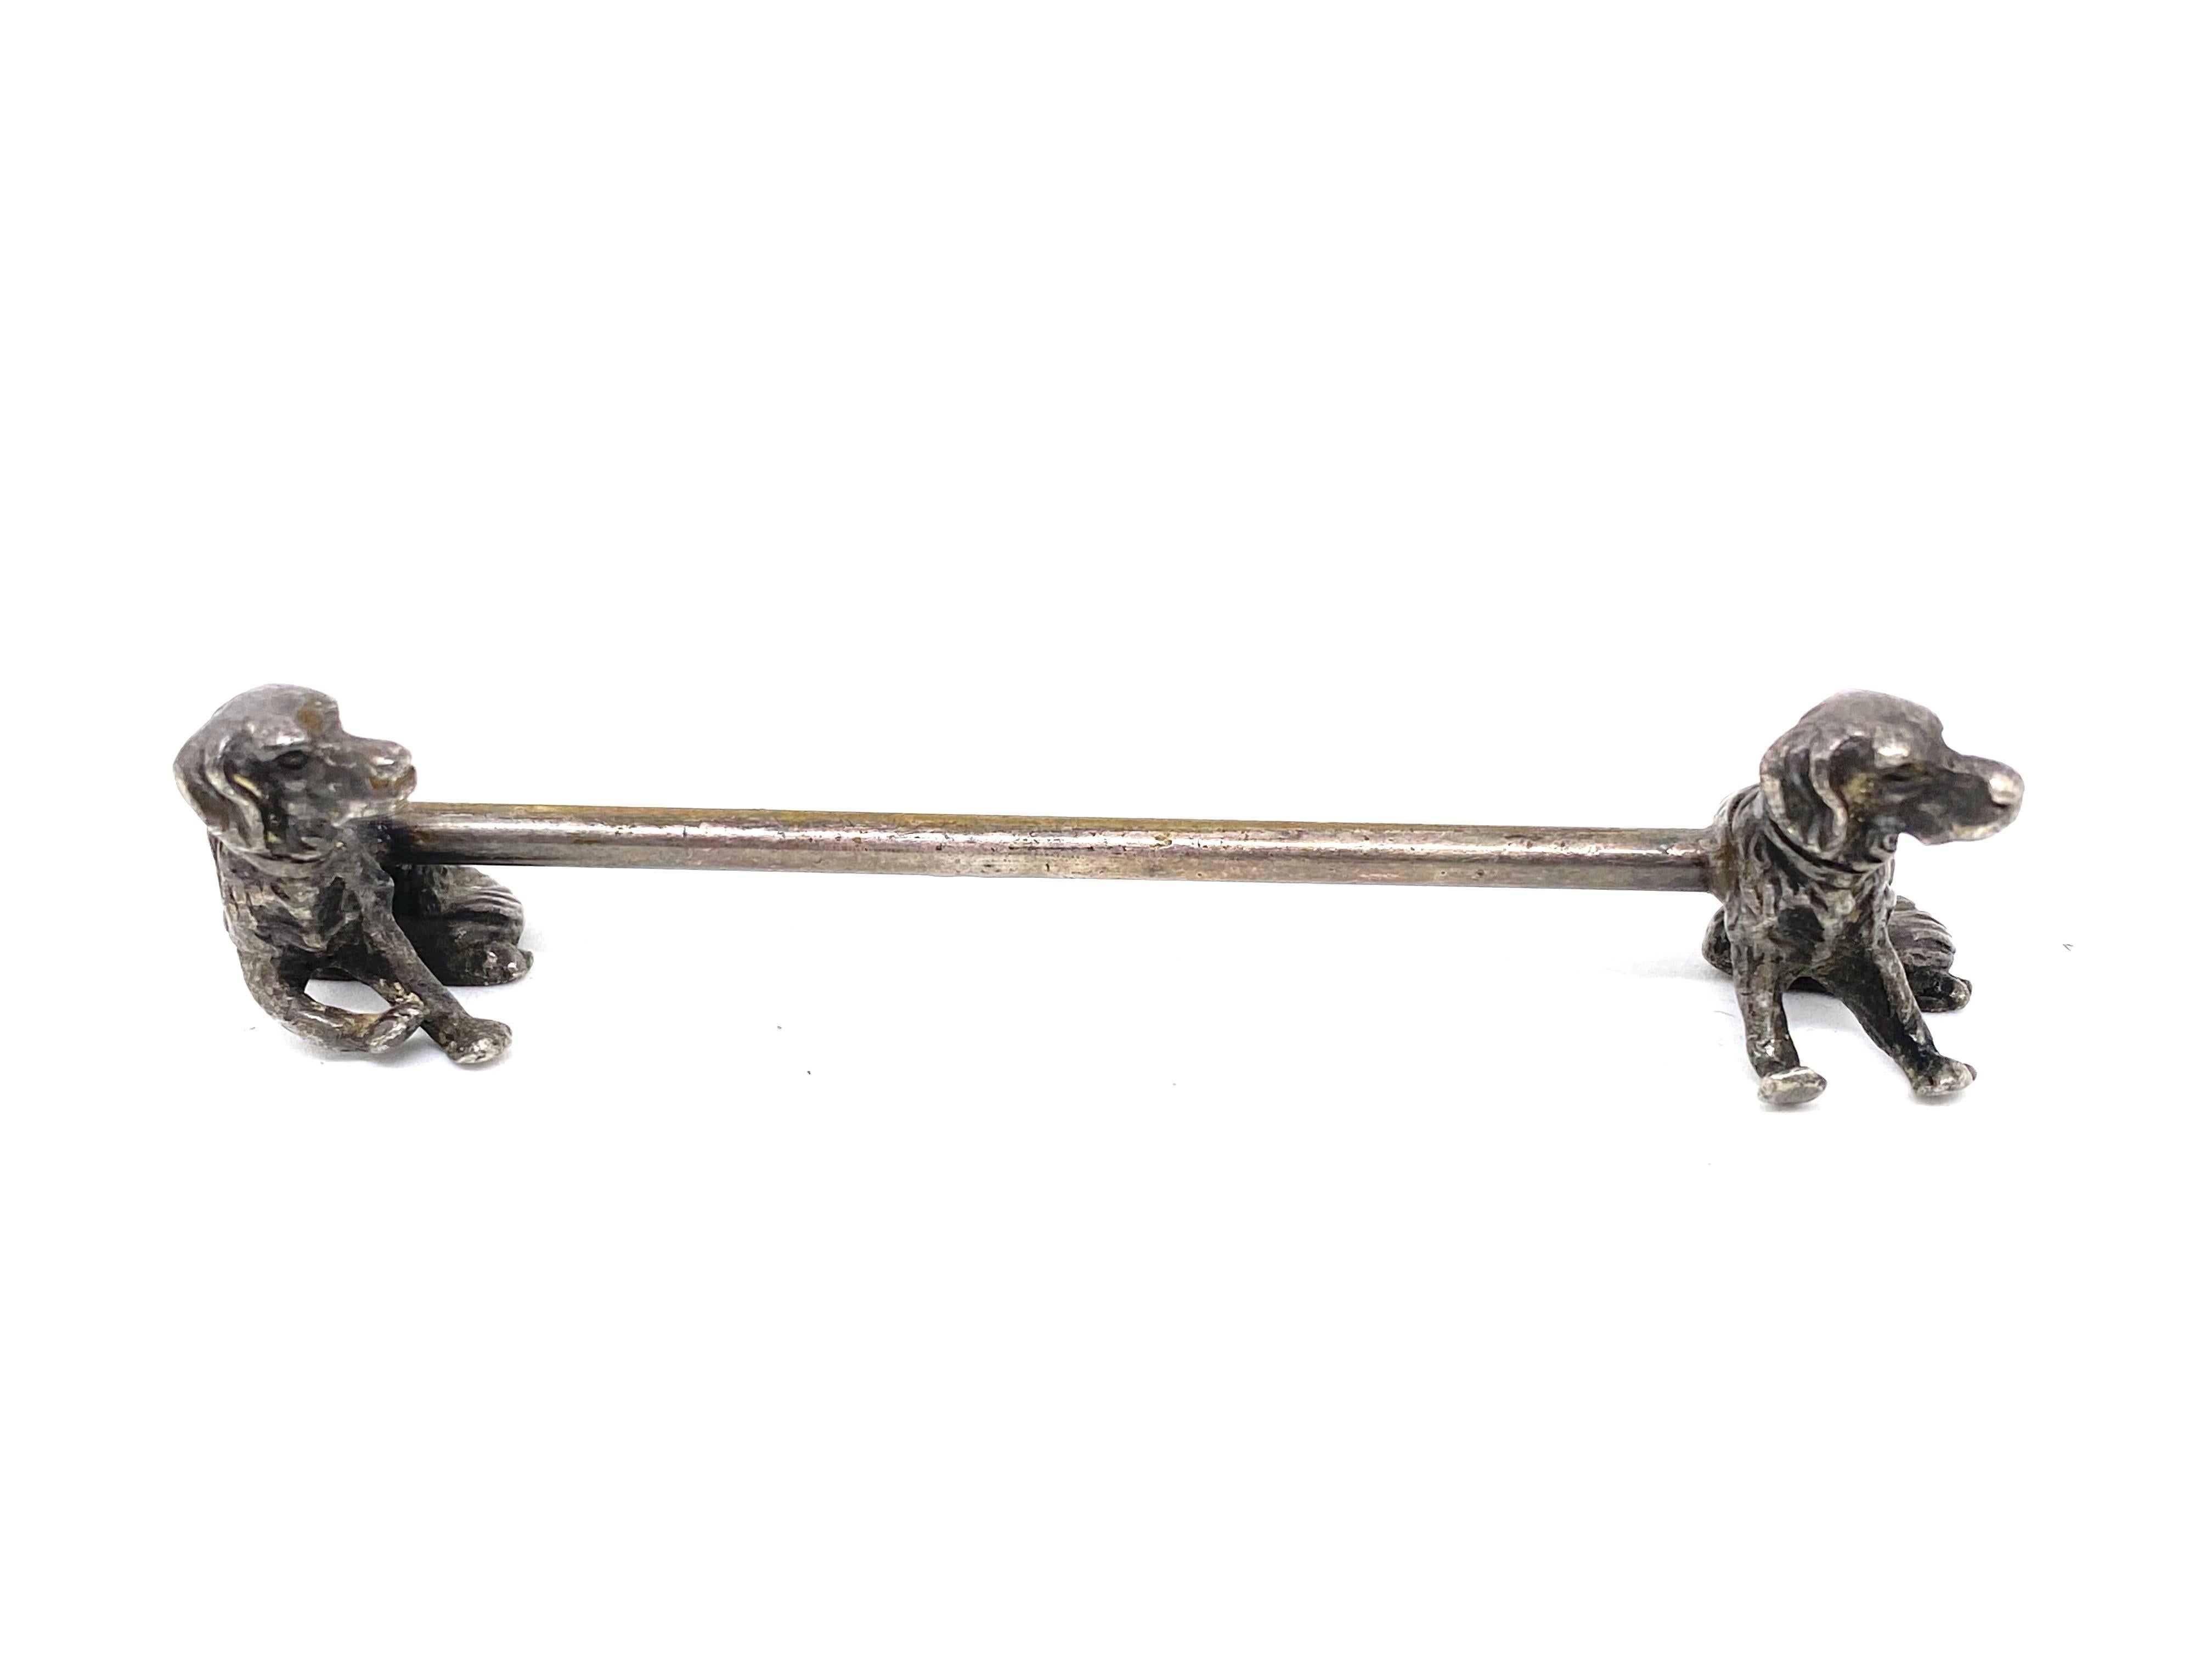 A set of four silver plated figural flatware knife rests in the form of Animals (Lion, Fox, Wild Boar and a Dog), circa 1890s, European. Nice addition to every table or just for your collection. Tarnished and silver plate lost, but this is old-age